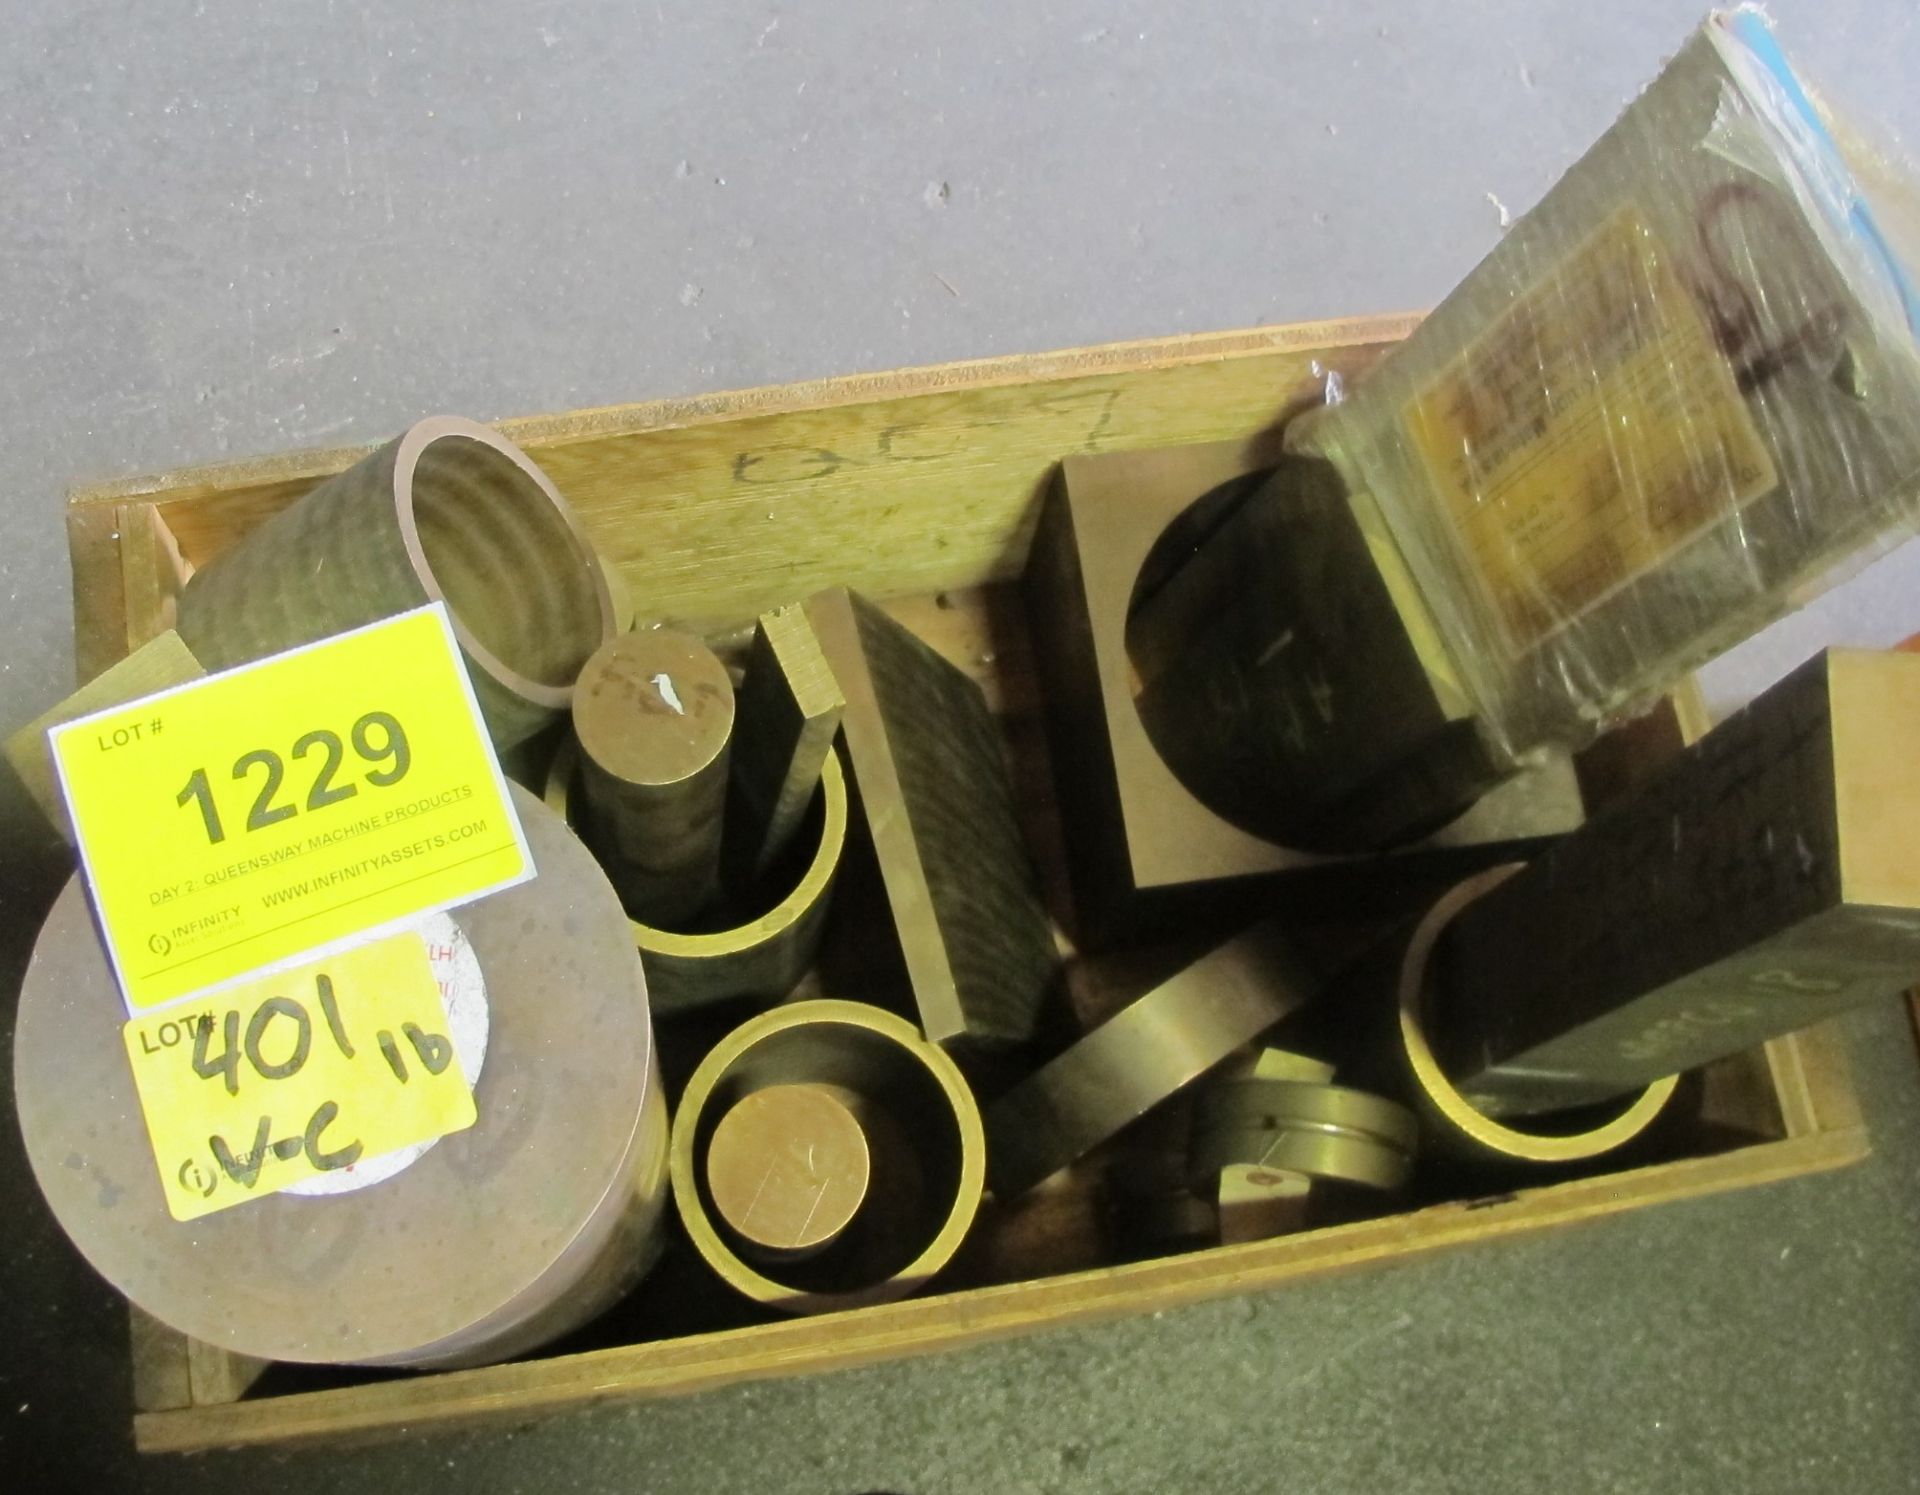 CRATE OF BRONZE, BERILIUM, COPPER AS LABELLED, APPROX. 400LBS TOTAL WEIGHT - Image 2 of 2